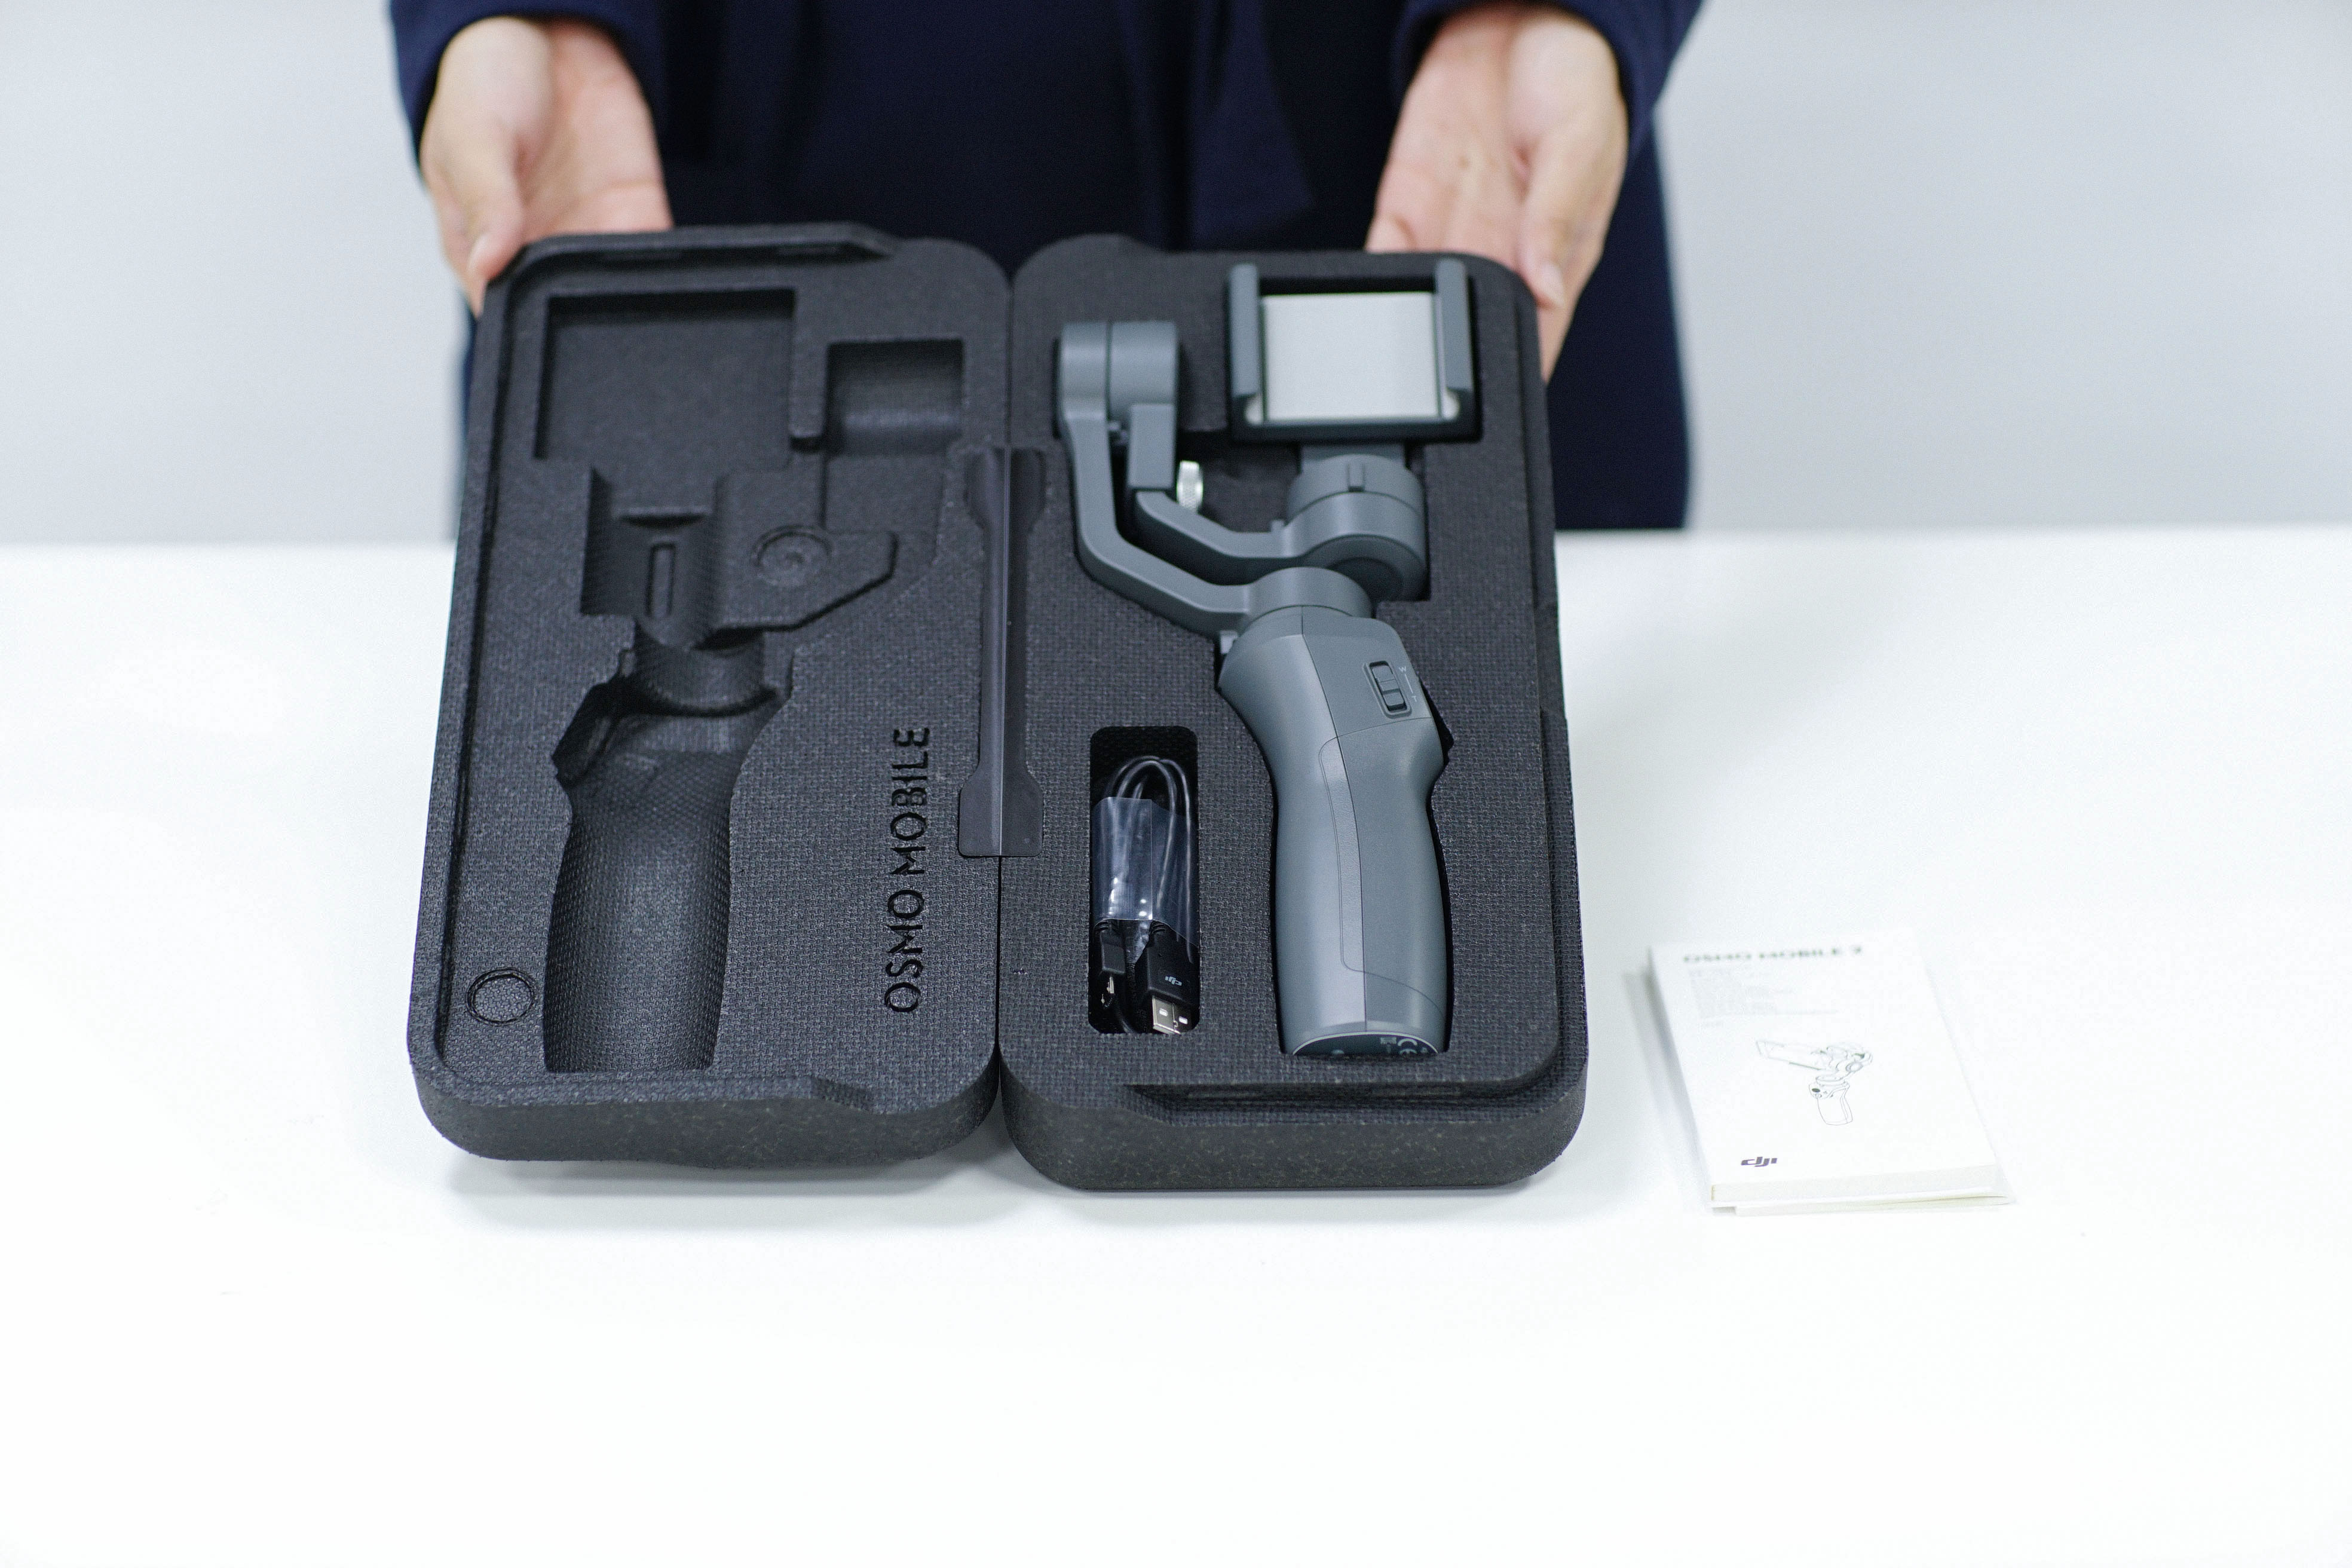 What's in the Box? First Glimpse of DJI Osmo Mobile 2 | D1 Store